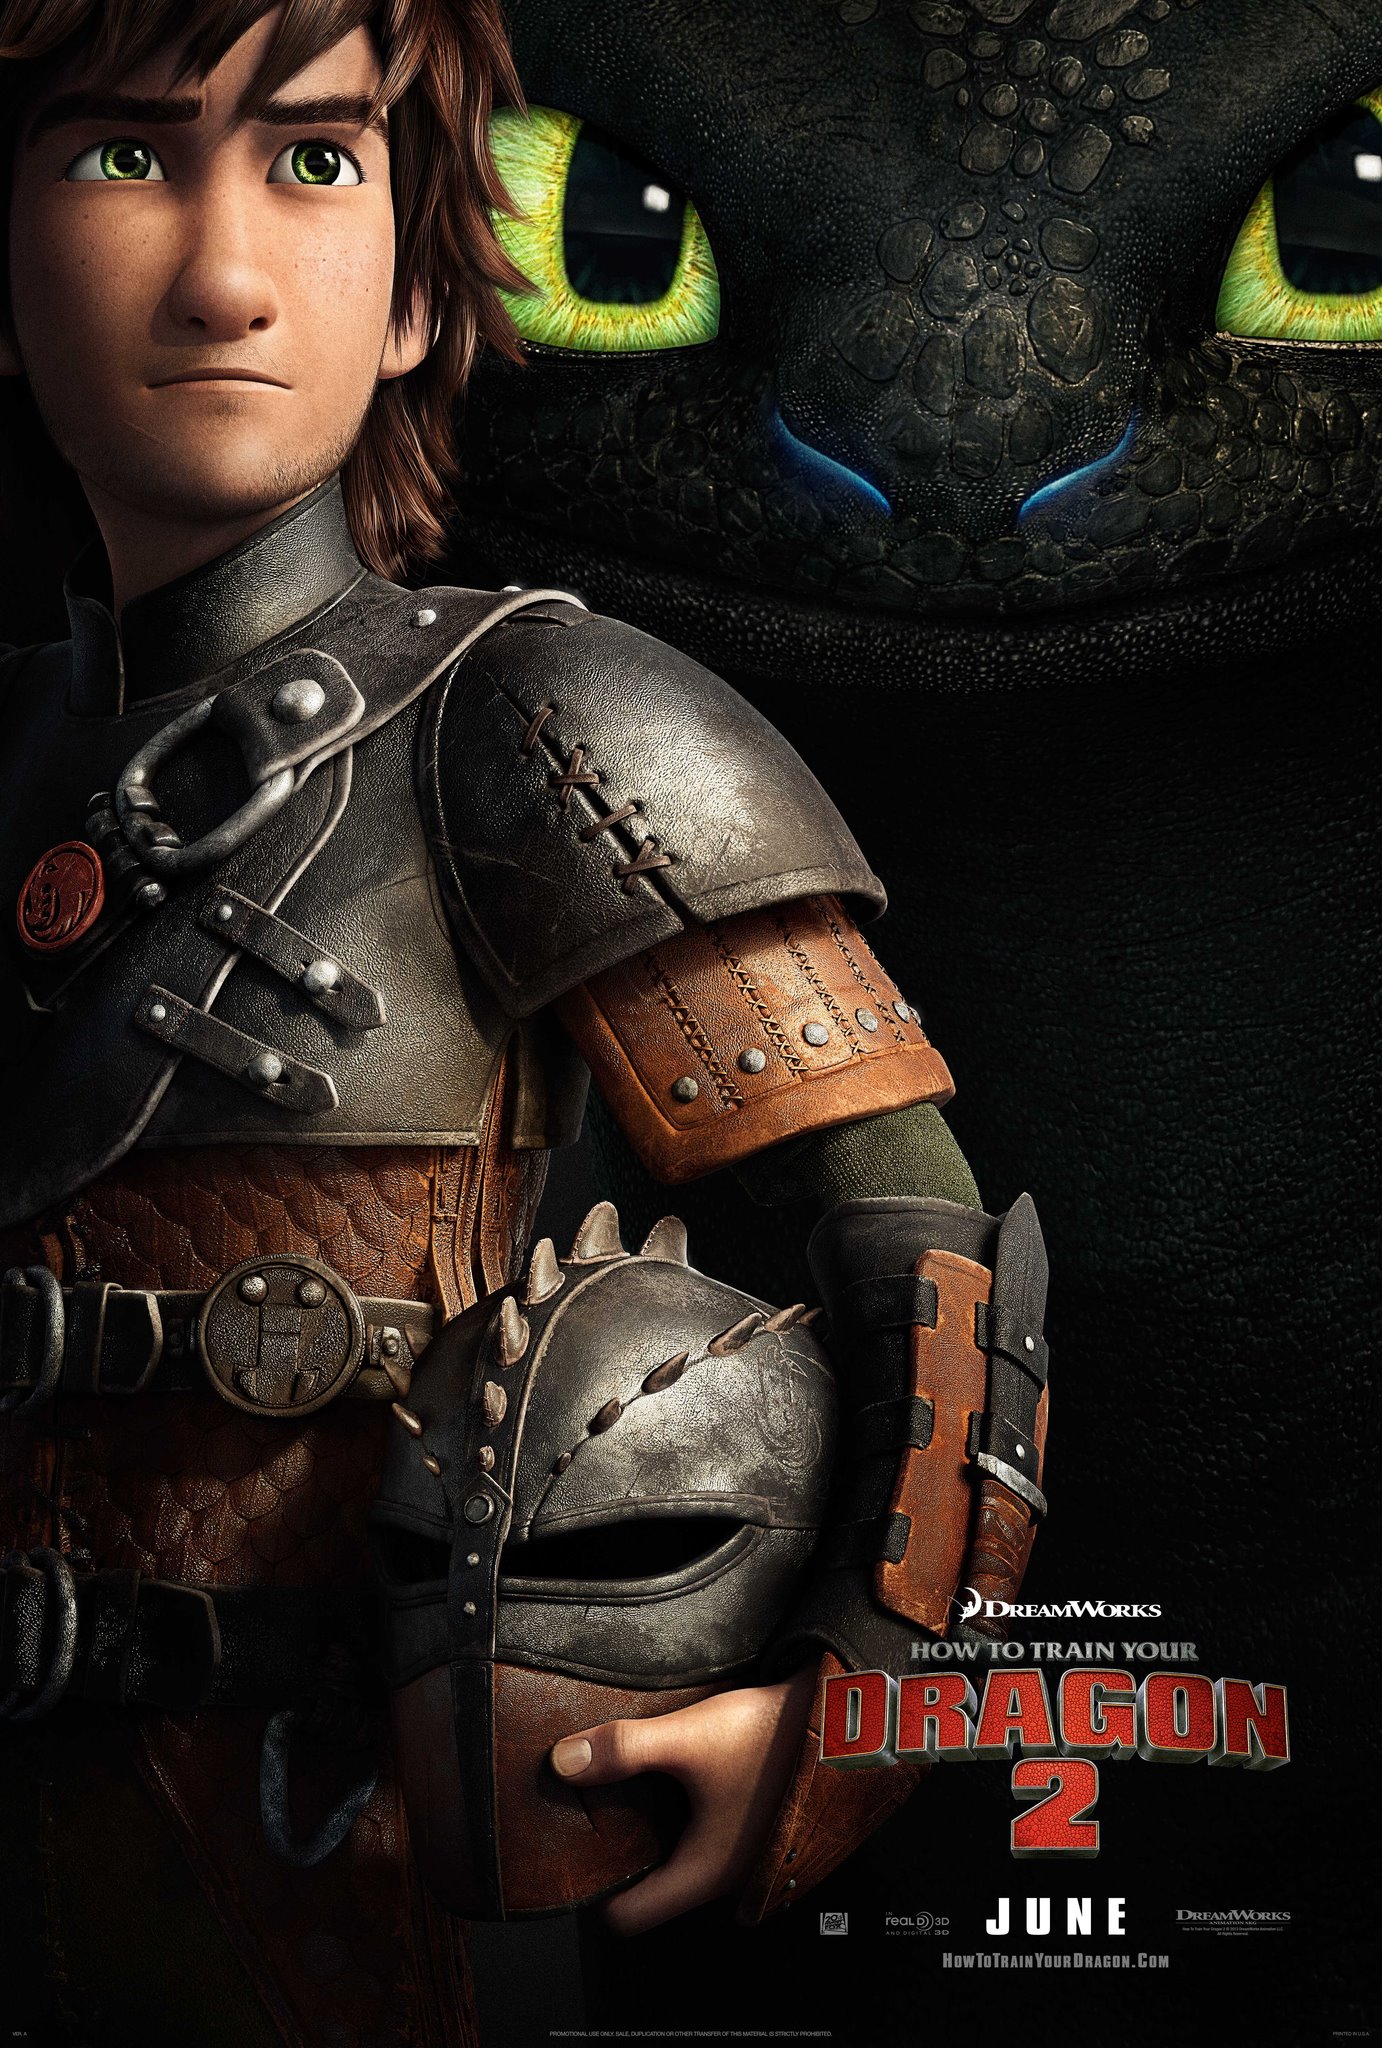 How to Train Your Dragon Official Movie Poster Desktop Wallpaper